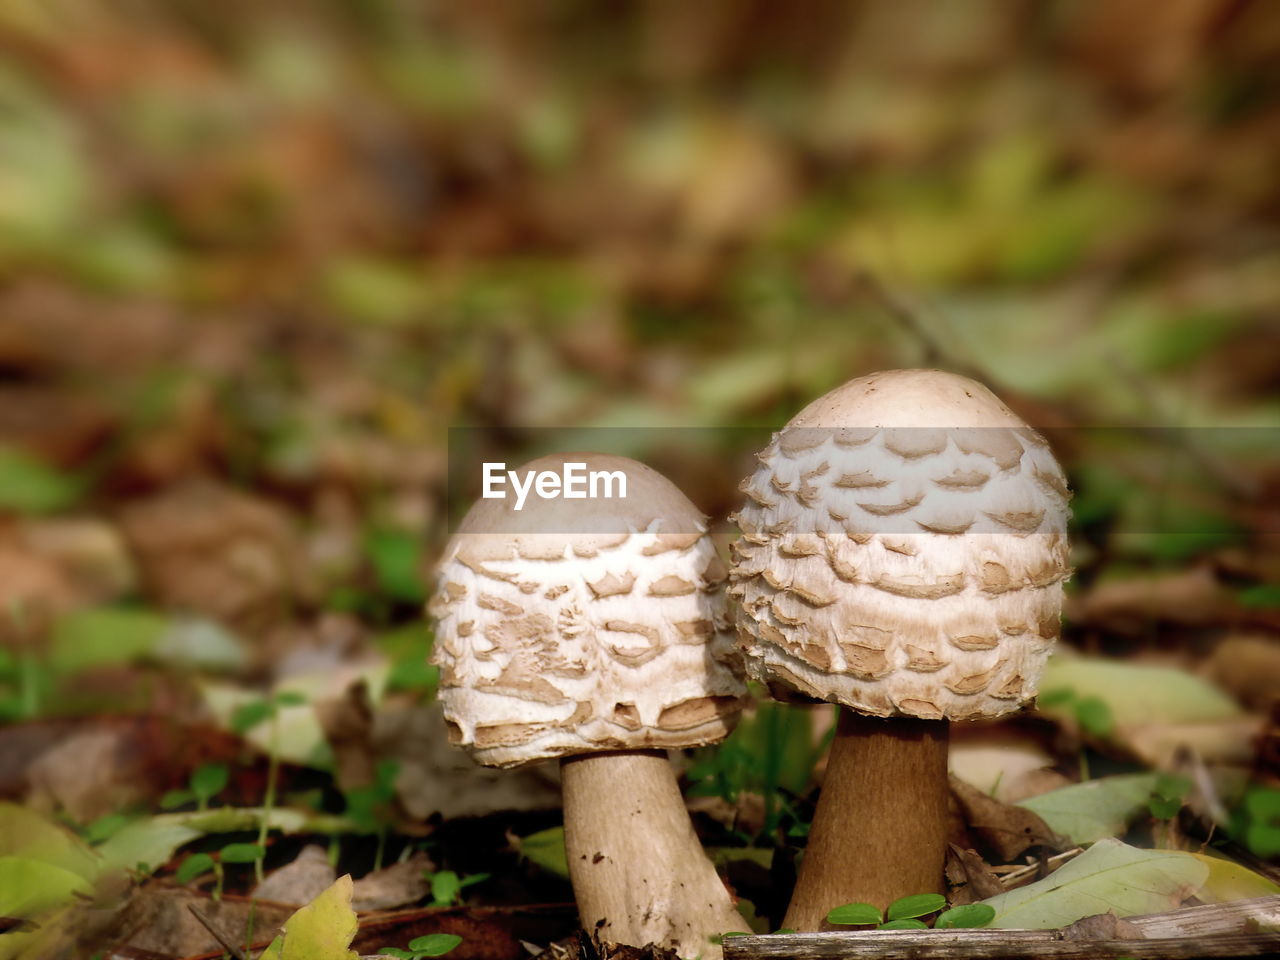 mushroom, fungus, vegetable, food, plant, land, edible mushroom, growth, nature, forest, close-up, agaricaceae, agaricus, food and drink, no people, autumn, macro photography, woodland, tree, toadstool, beauty in nature, focus on foreground, day, penny bun, freshness, oyster mushroom, fragility, outdoors, field, bolete, leaf, matsutake, plant part